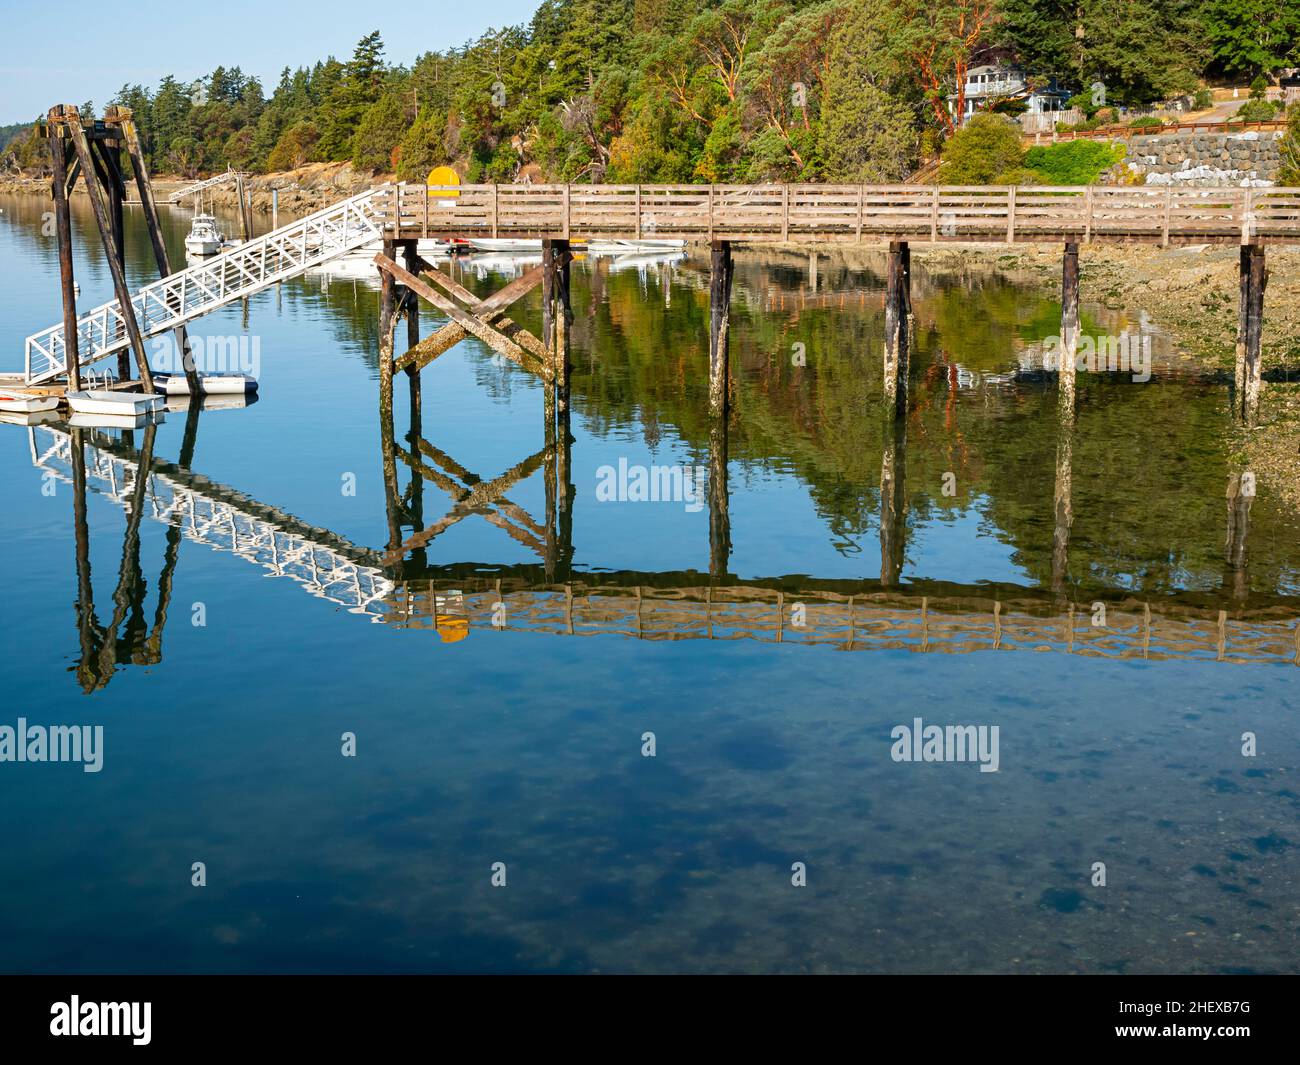 WA21082-00...WASHINGTON - Perfect reflection in the calm waters of West Sound on Orcas Island. Stock Photo